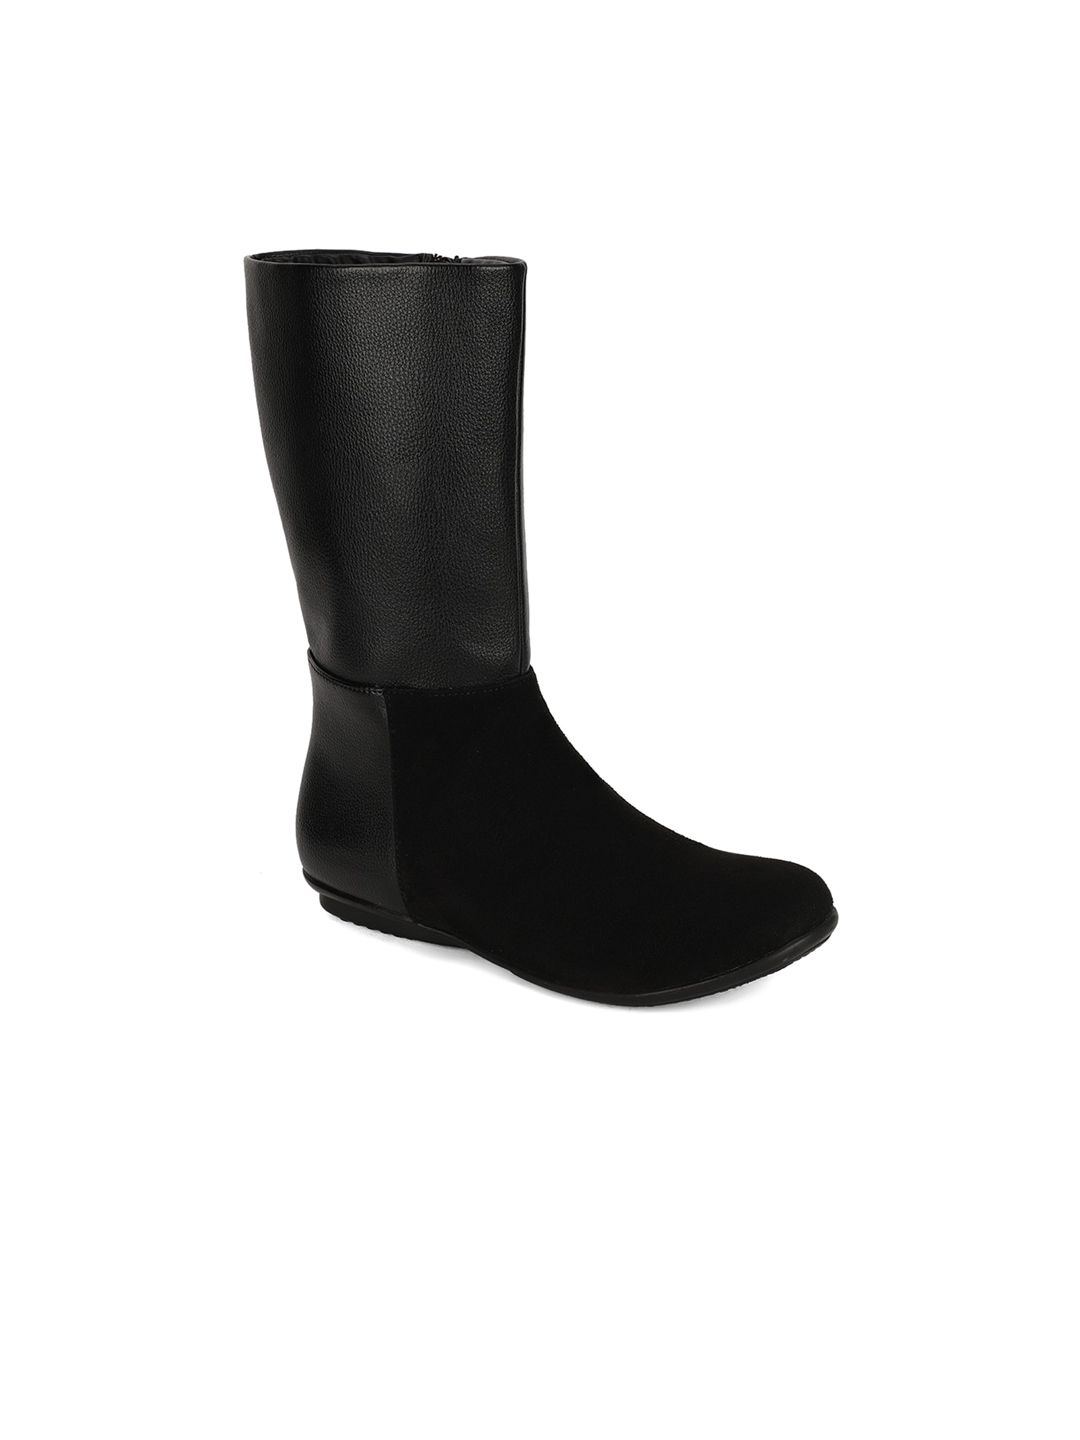 Bruno Manetti Black Suede Wedge Heeled Boots Price in India